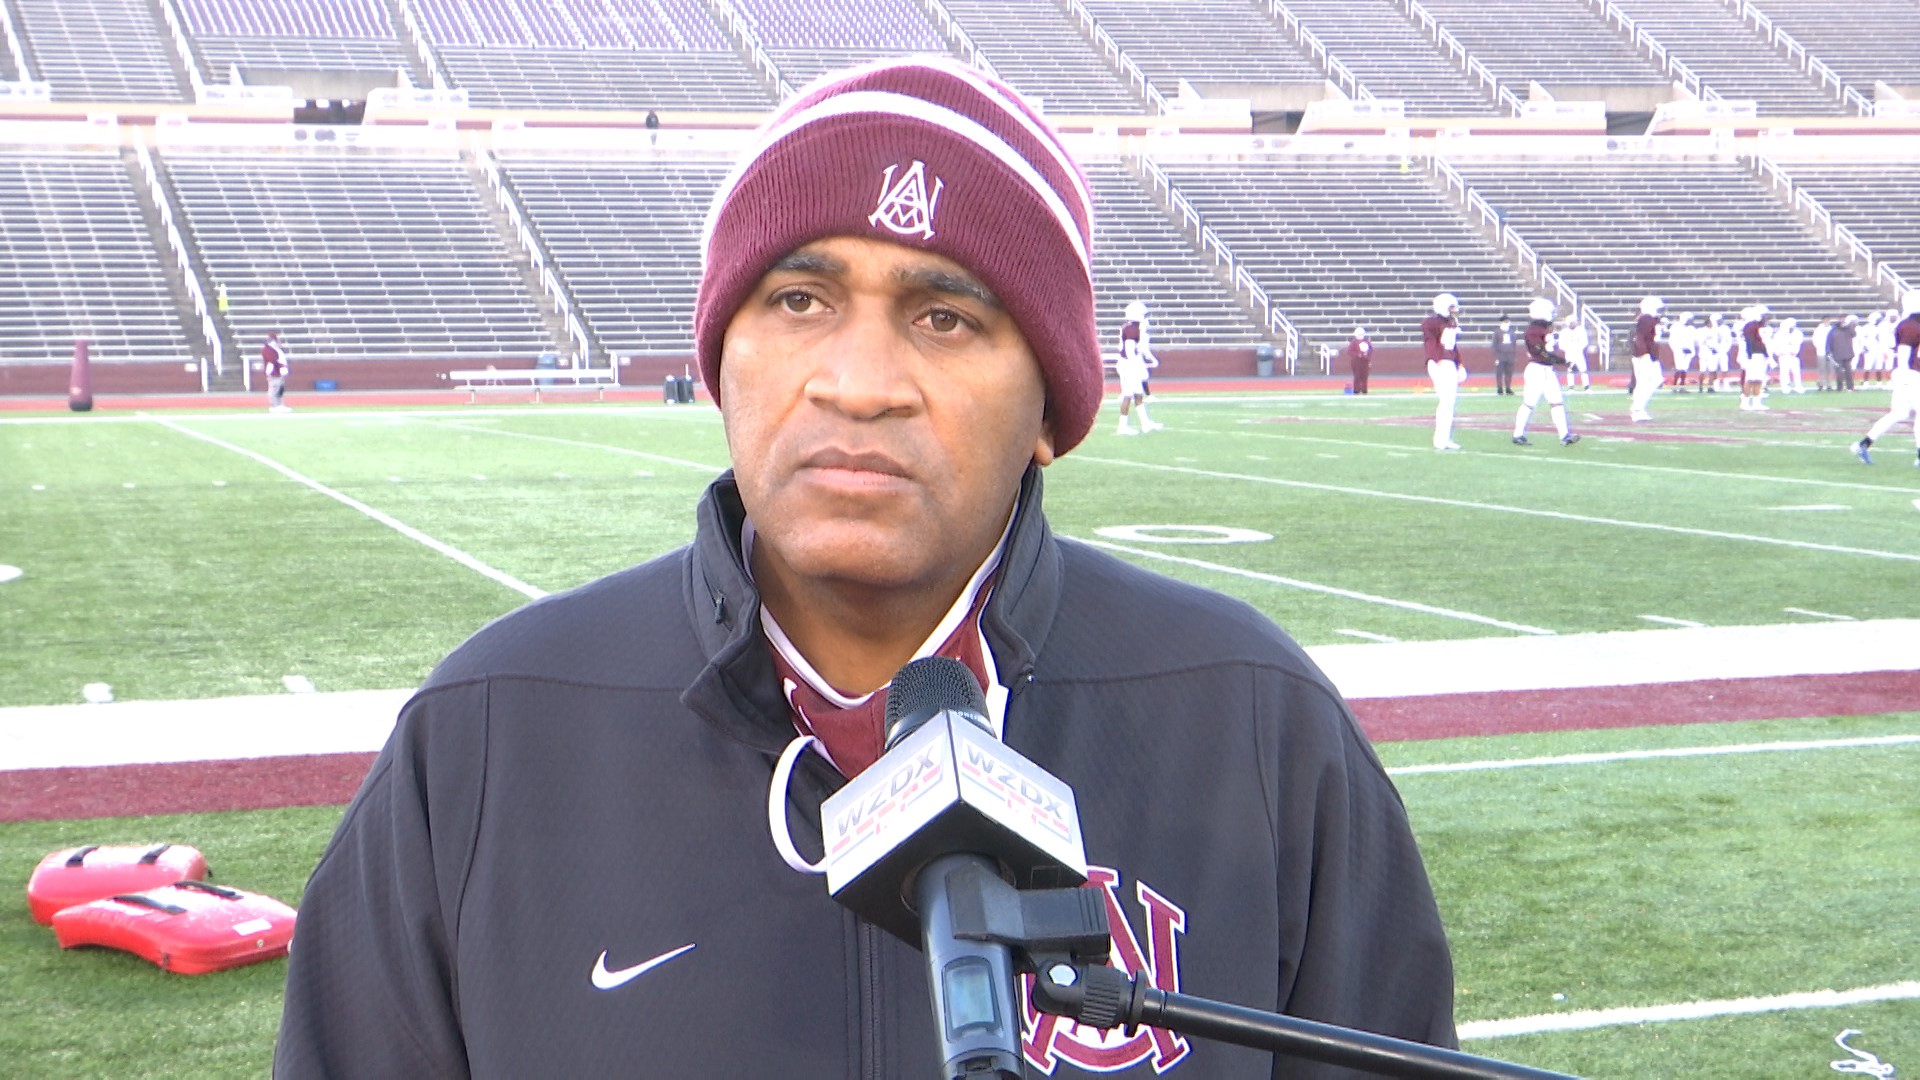 The SWAC's spring season begins in a few weeks for Alabama A&M. The Bulldogs won't play until March 6th due to Alcorn's opt out. Coach Maynor shared his thoughts